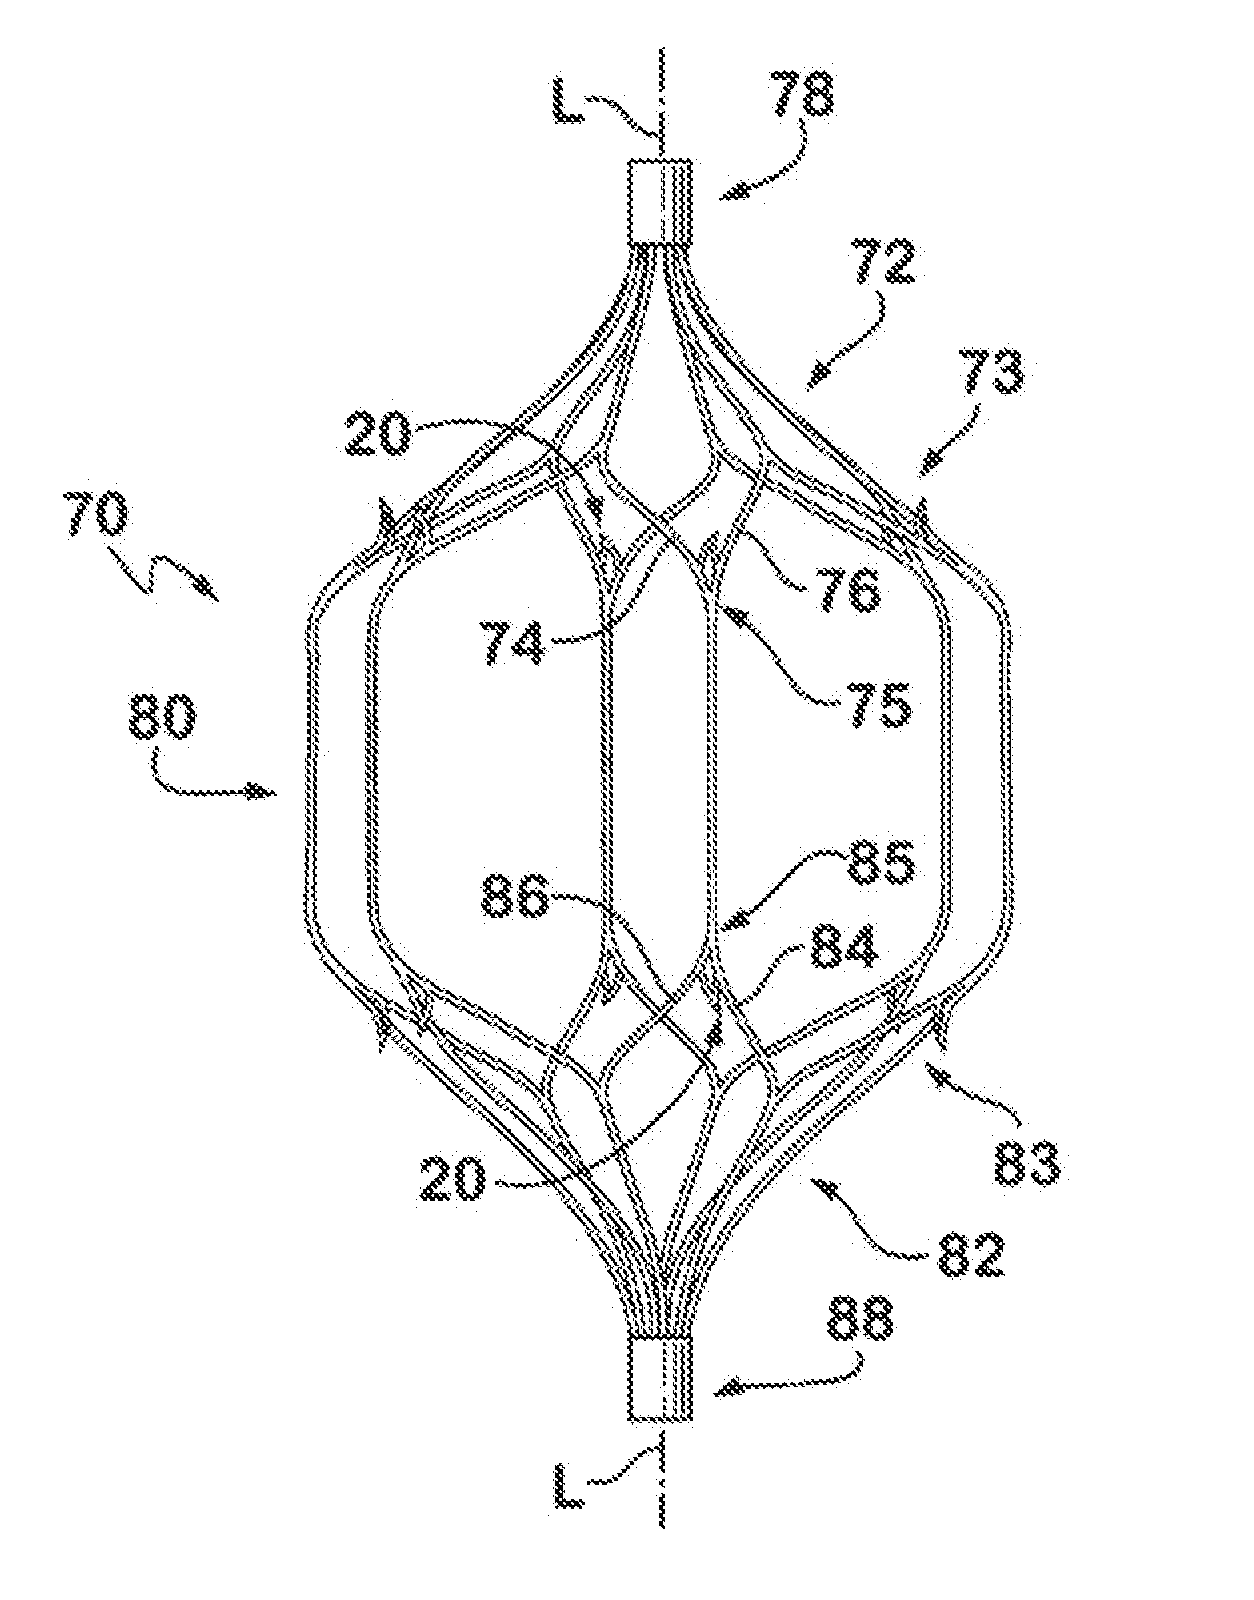 IVC Filter with Translating Hooks